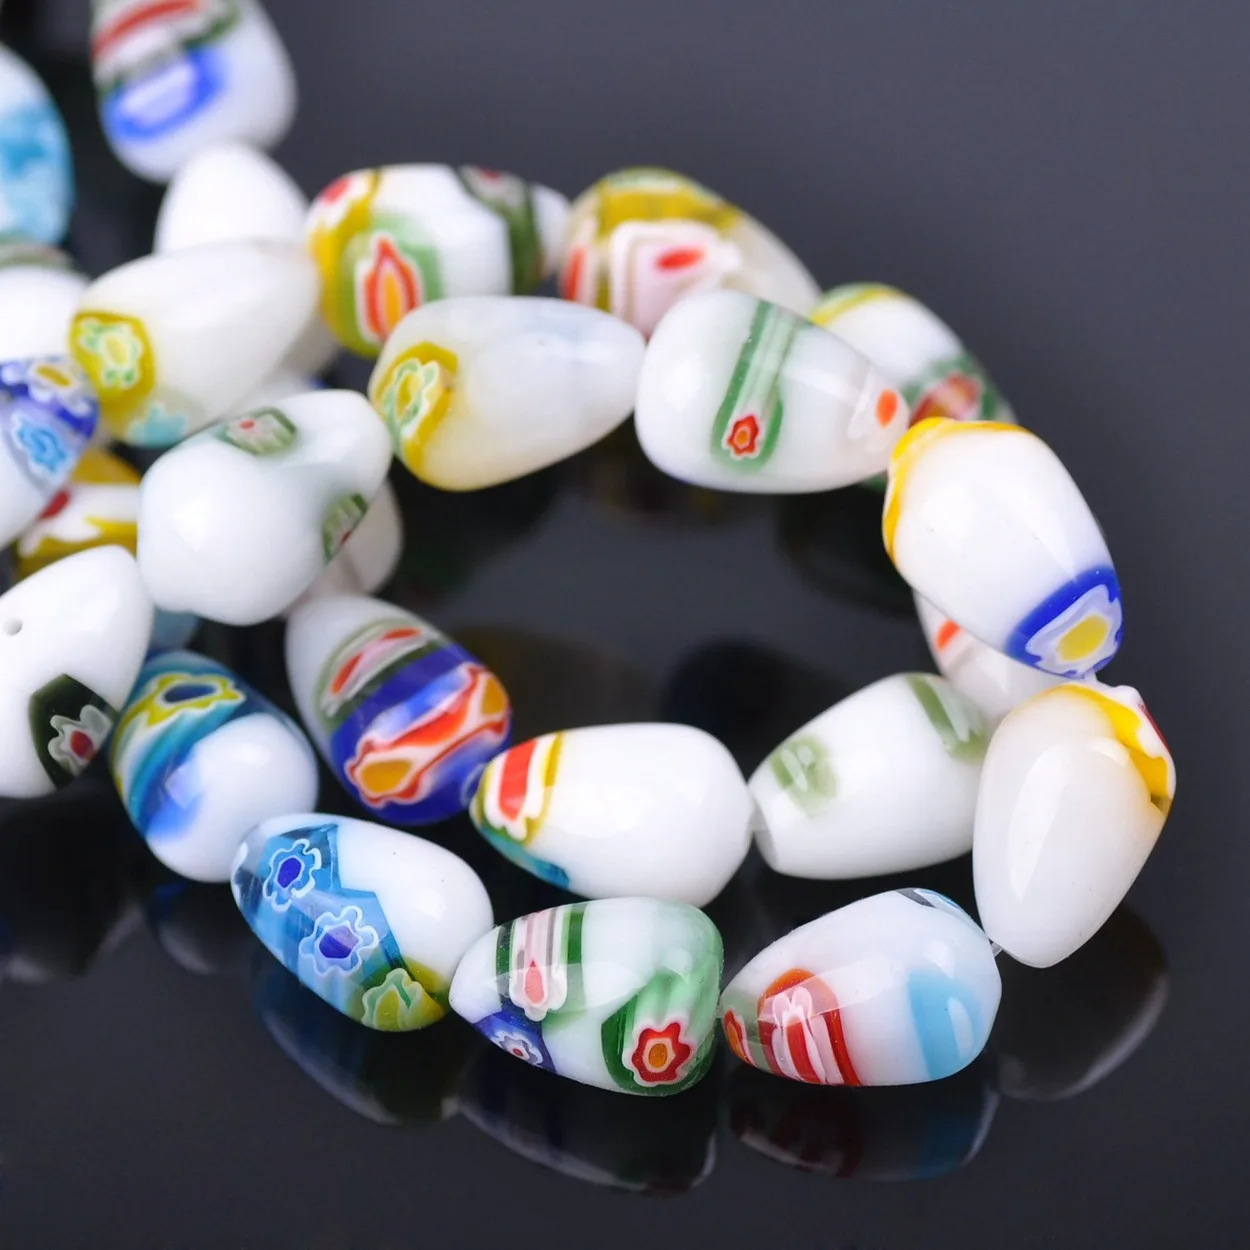 10pcs Random Mixed Flower Patterns 10x14mm Teardrop Shape Millefiori Glass Lampwork Loose Beads For Jewelry Making DIY Findings 10pcs 10mm random mixed colors round crystal glass ball